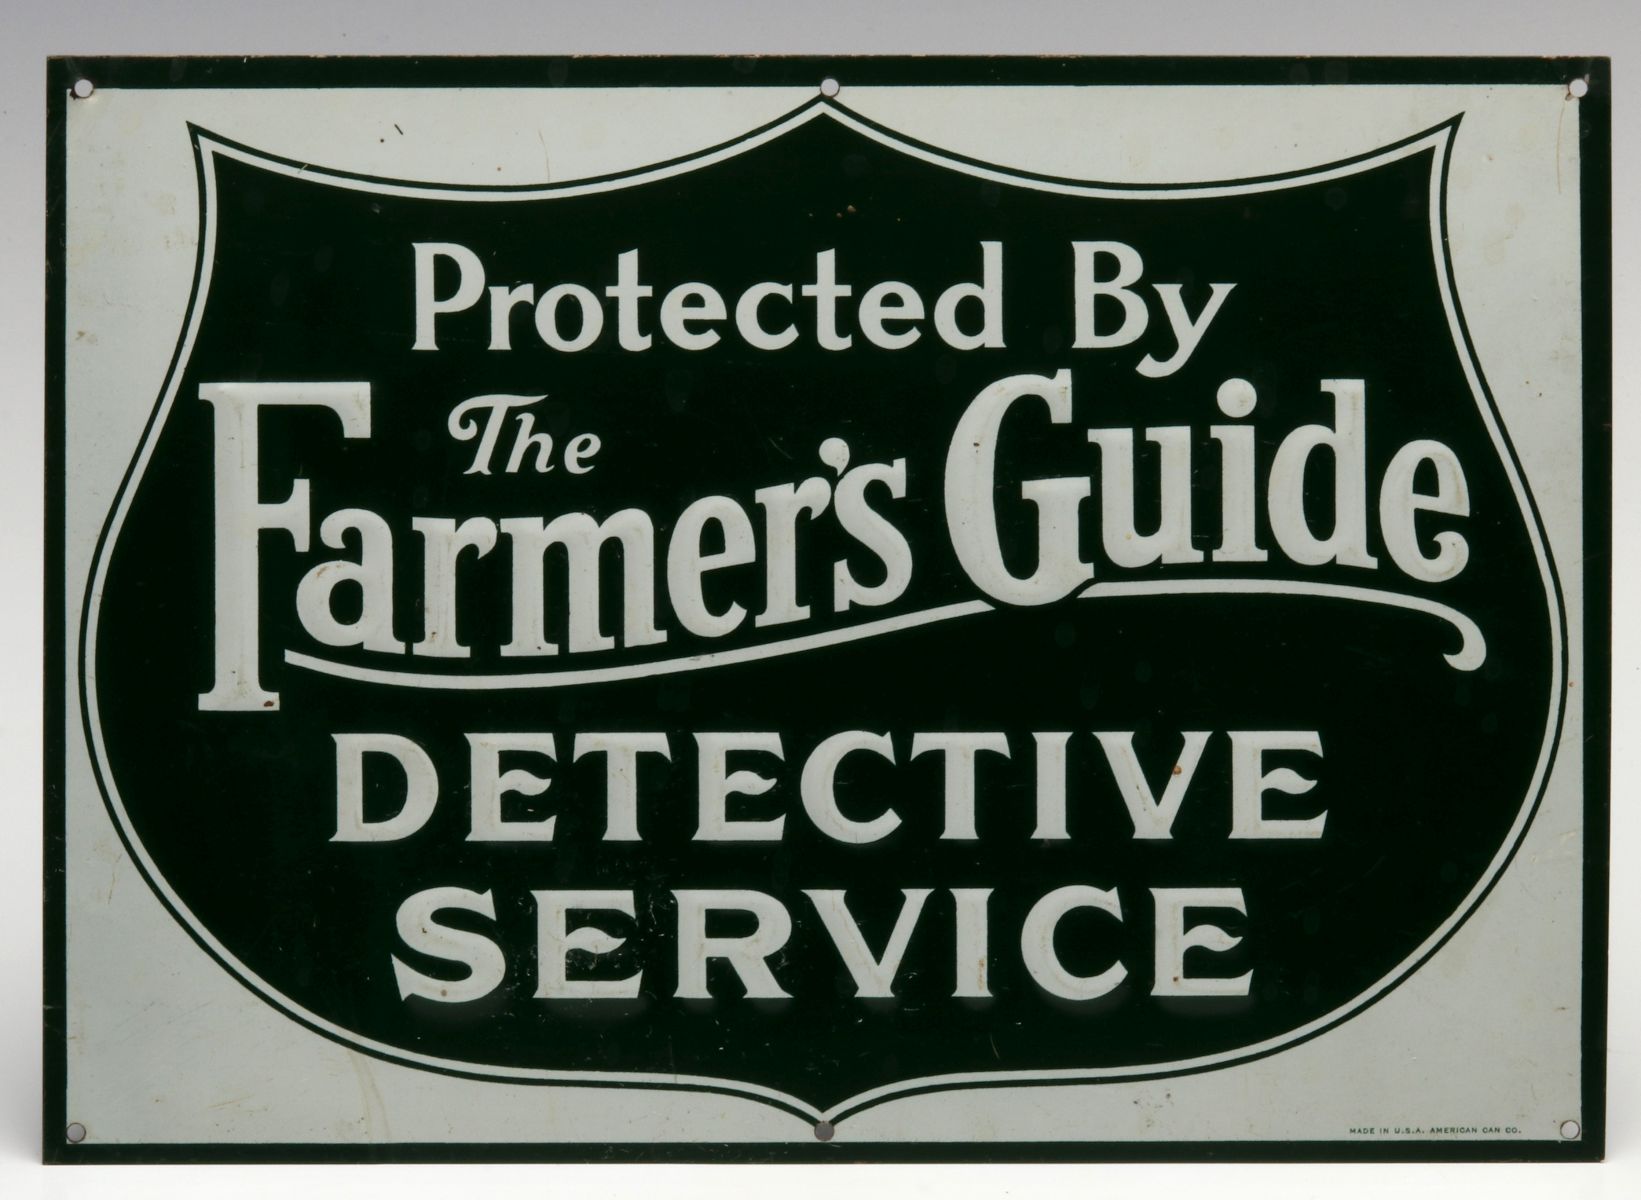 PROTECTED BY THE FARMER'S GUIDE DETECTIVE SERVICE